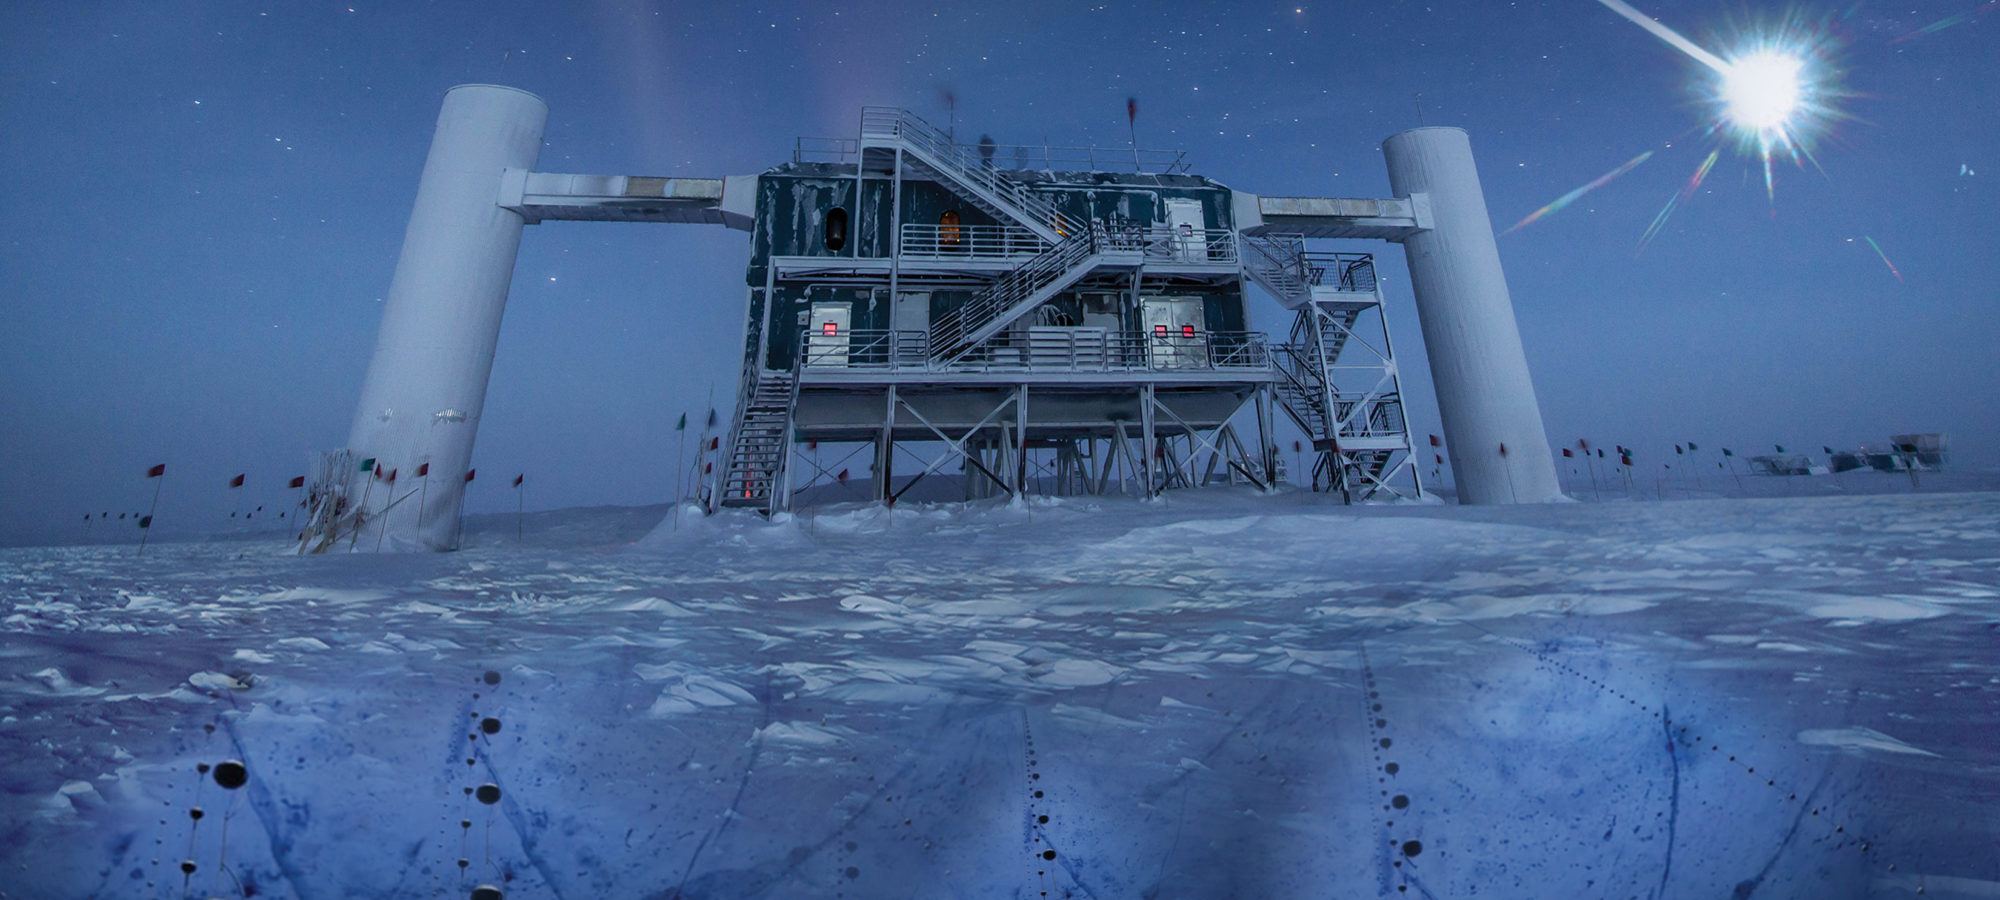 The IceCube Lab at the South Pole